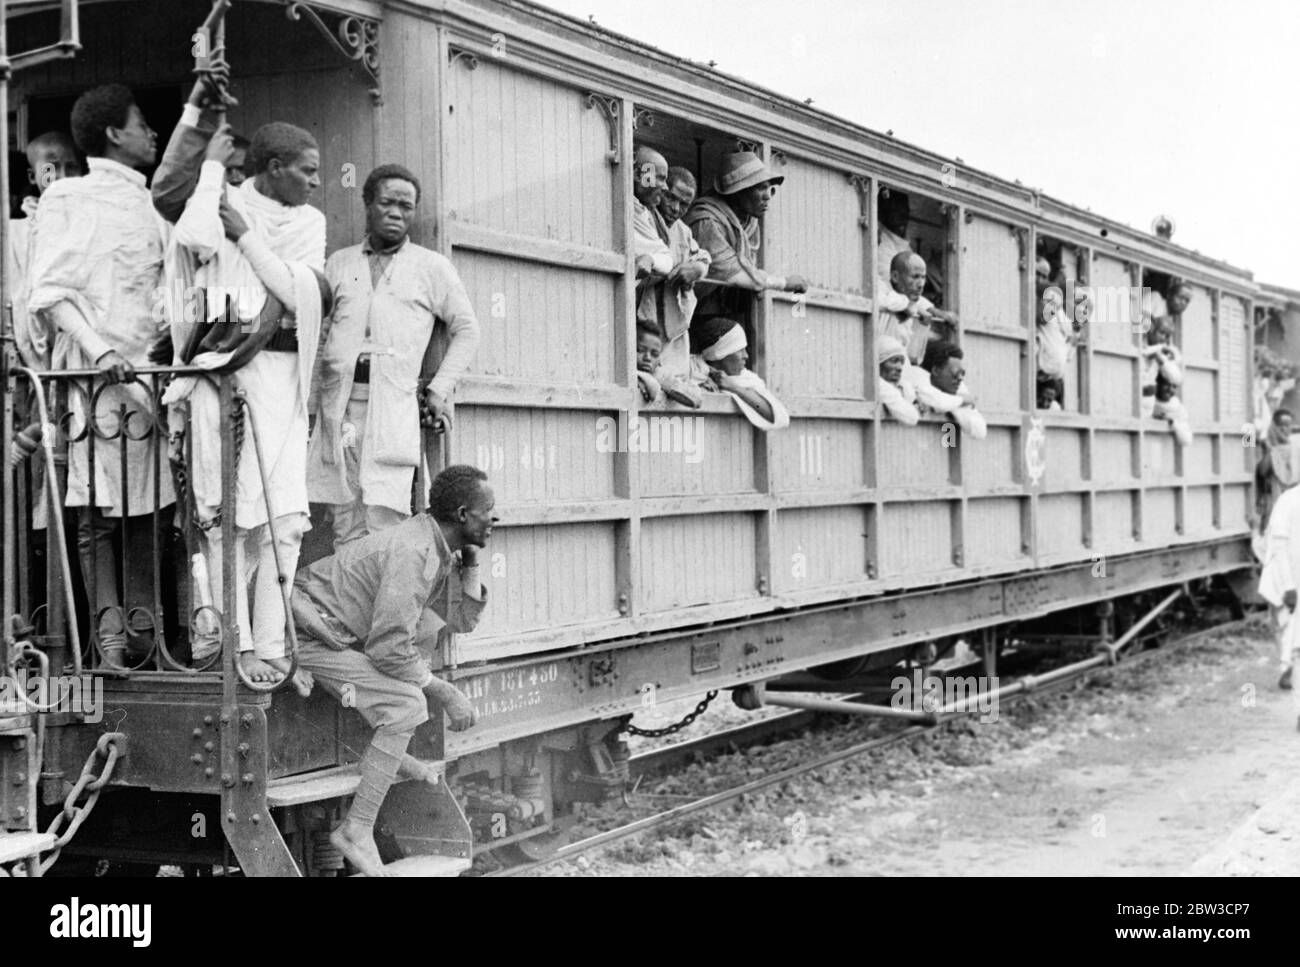 Abyssinian troops rushed to Somaliland frontier as zero hour approaches in Italo - Abyssinian dispute . A train load of troops leaving Diradawa near the Ogaden frontier where hostilities were expected to break out first . 20 September 1935 Stock Photo